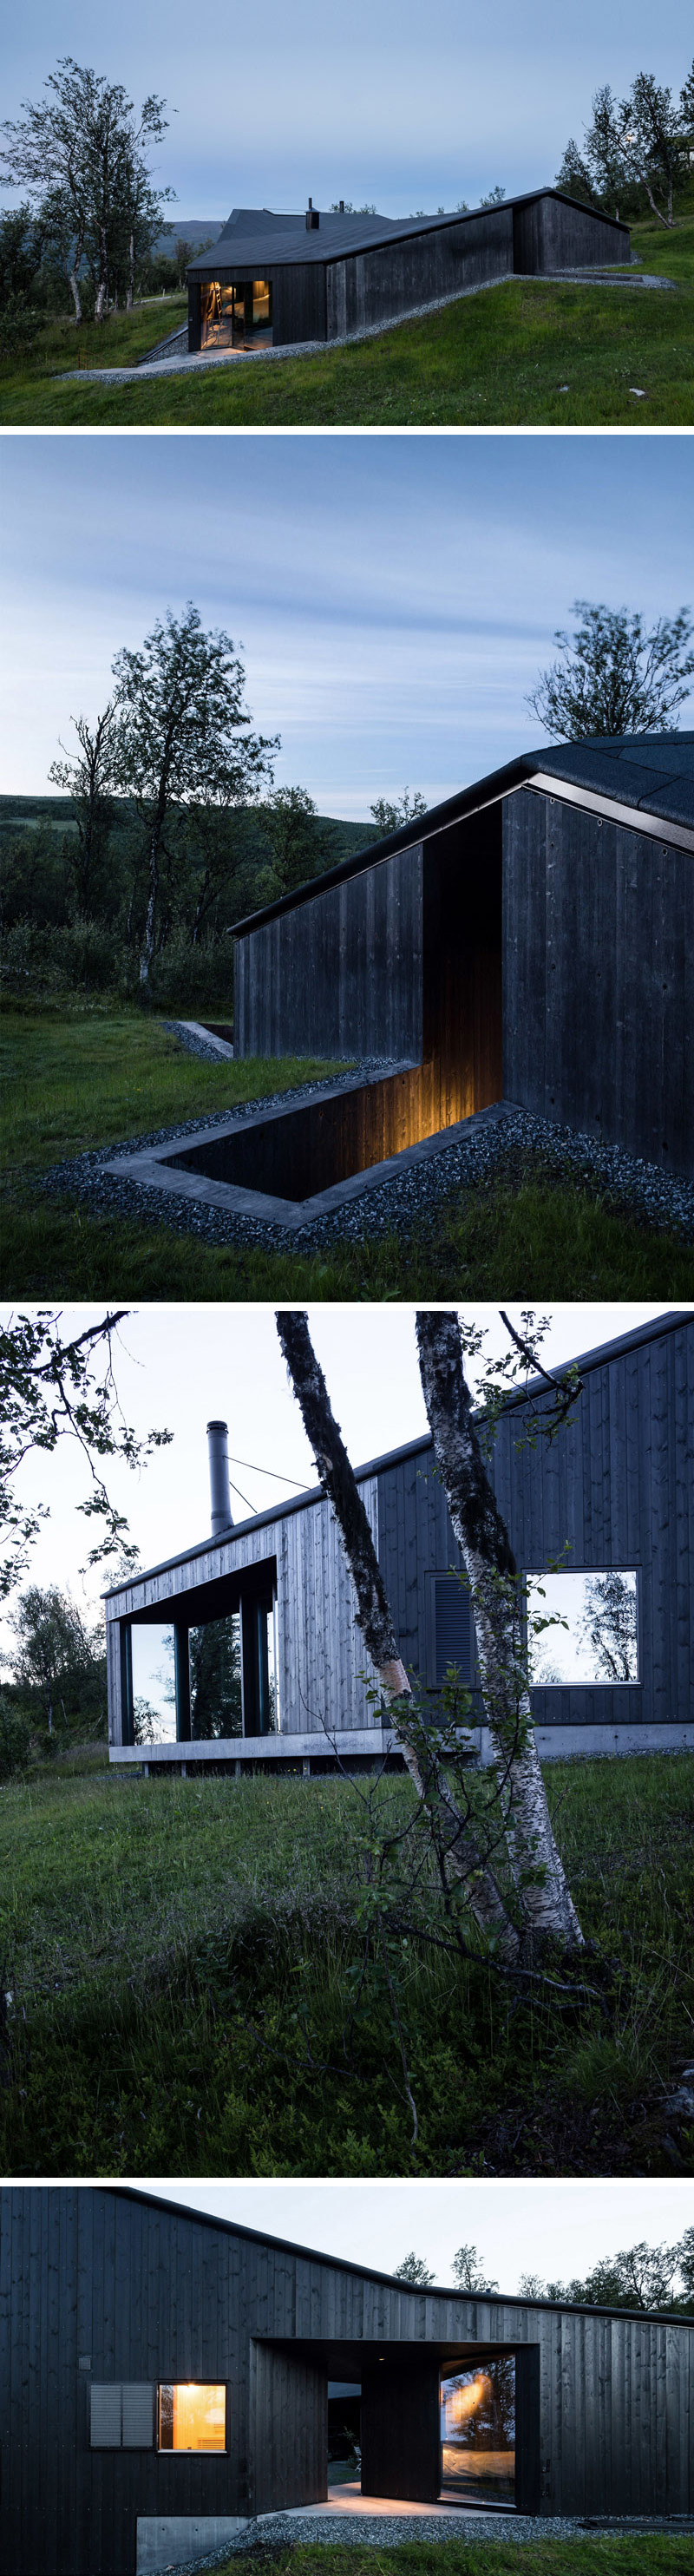 Blackened wood siding on this modern cabin allows the light coming from inside to cast a warm glow outside and gives the cabin a cozy look. #ModernBlackHouse #BlackHouse #BlackExterior #BlackArchitecture